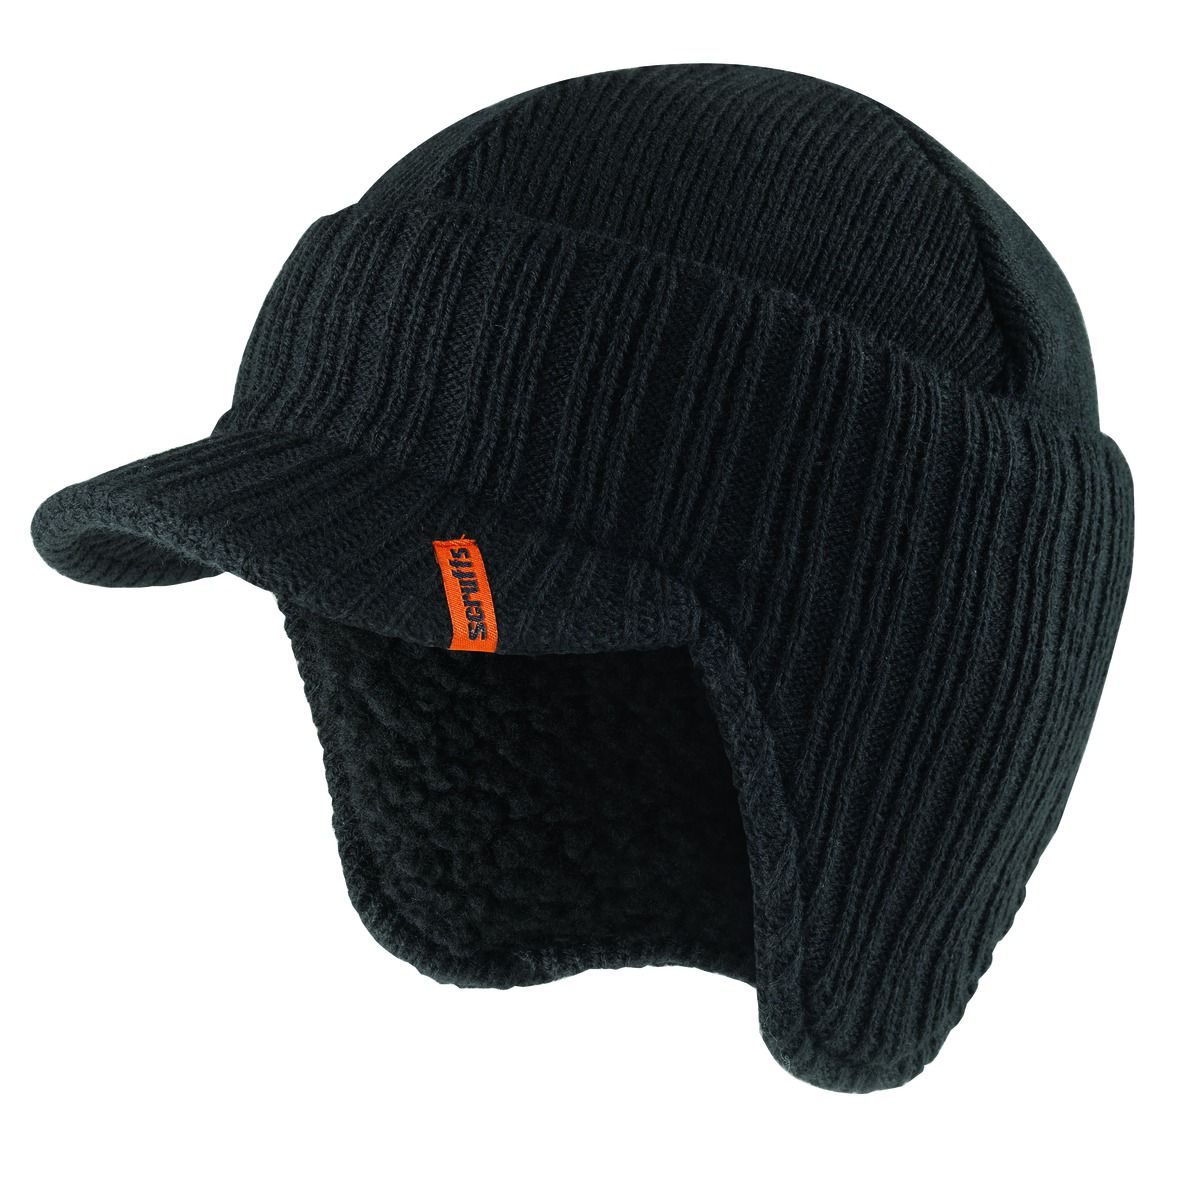 Image of Scruffs Peaked Knitted Work Beanie Hat Black - One Size